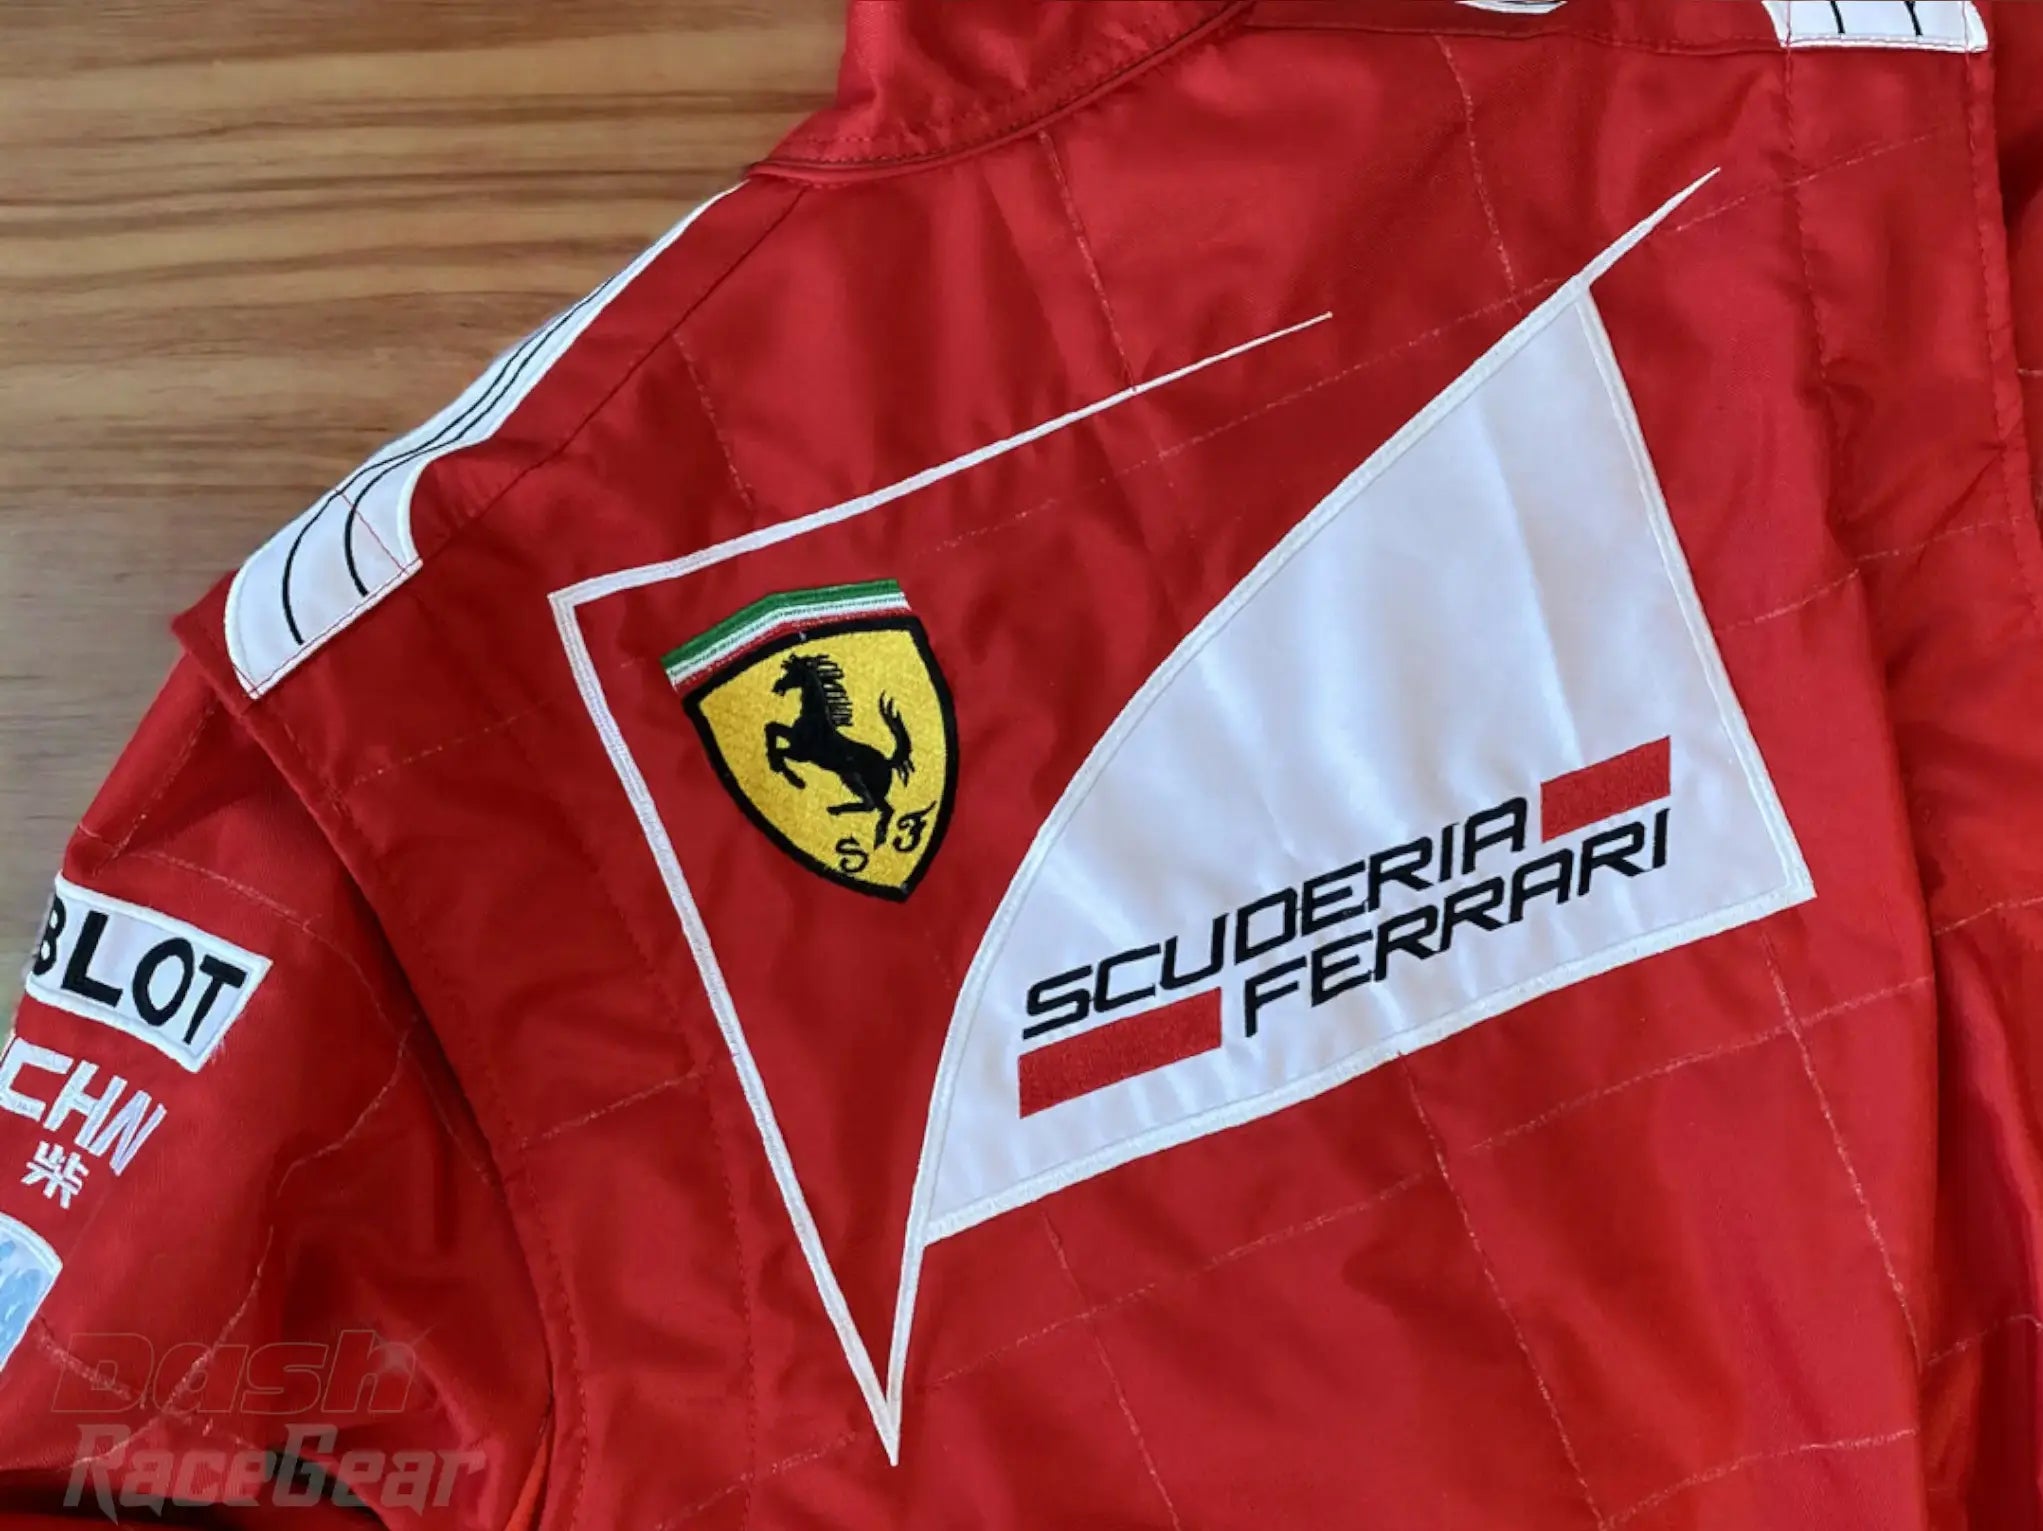 2014 Fernando Alonso Ferrari F1 Embroidered Racing Suit